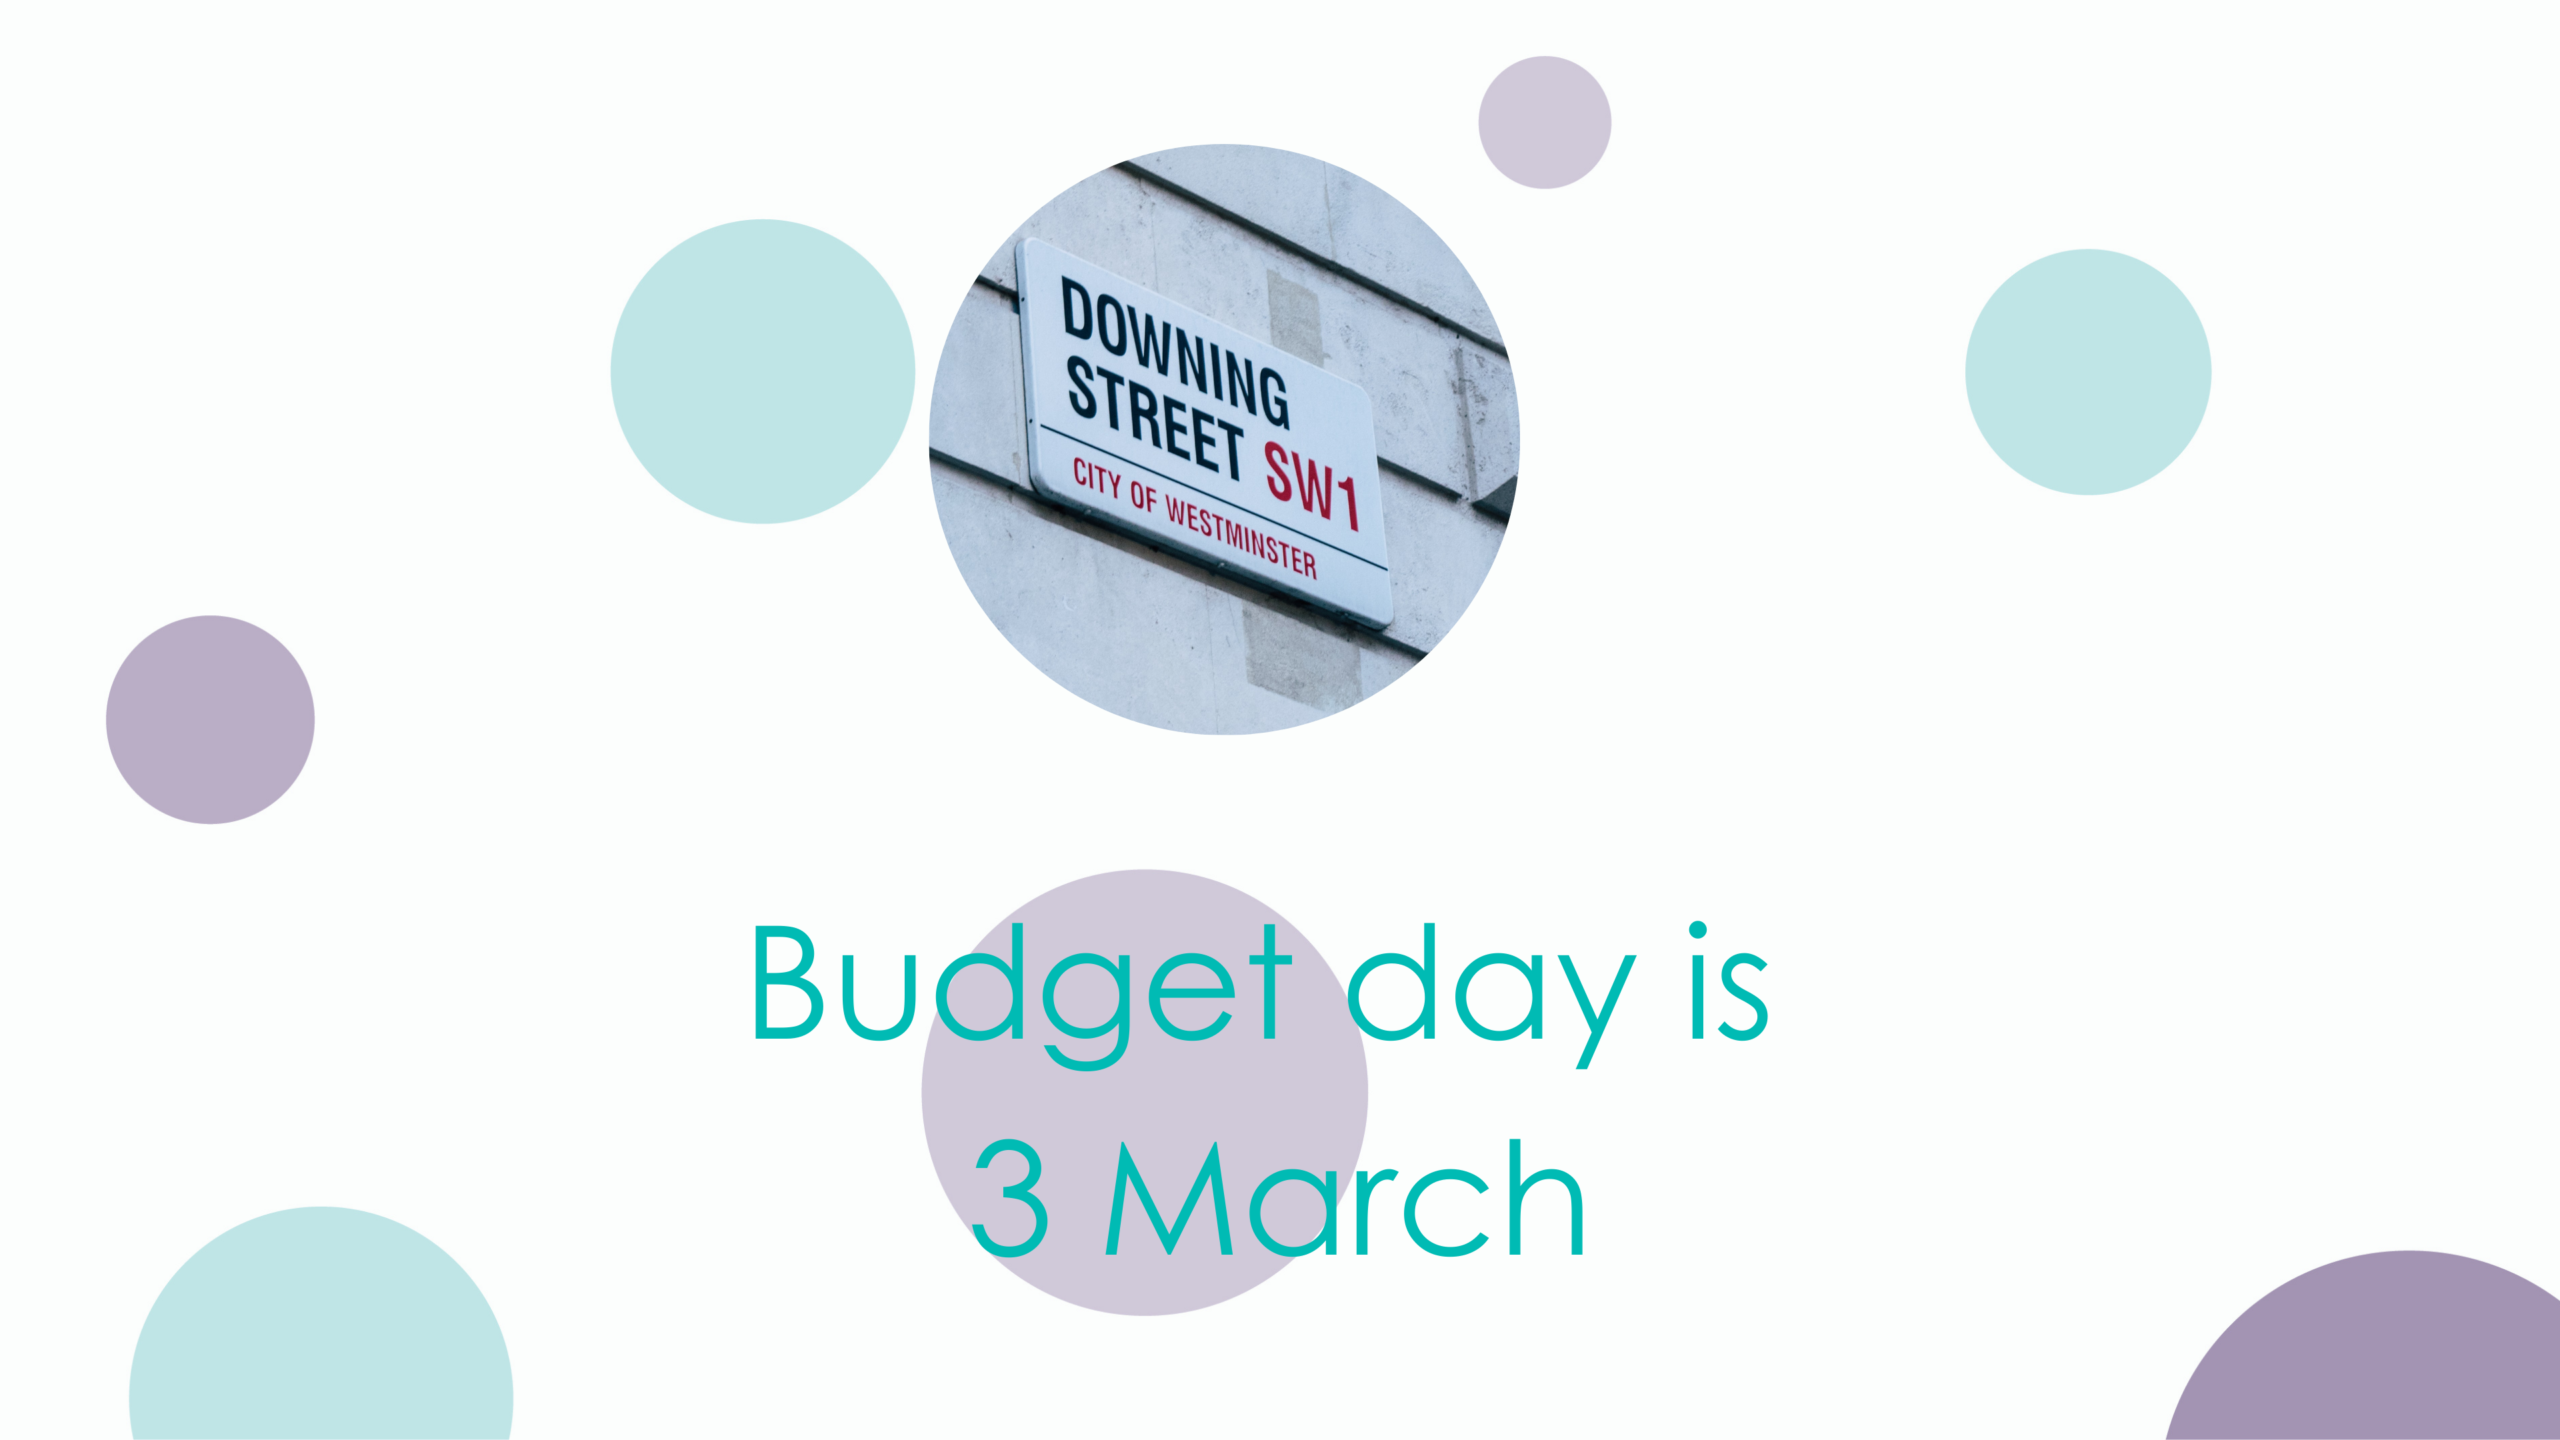 Budget day is 3 March